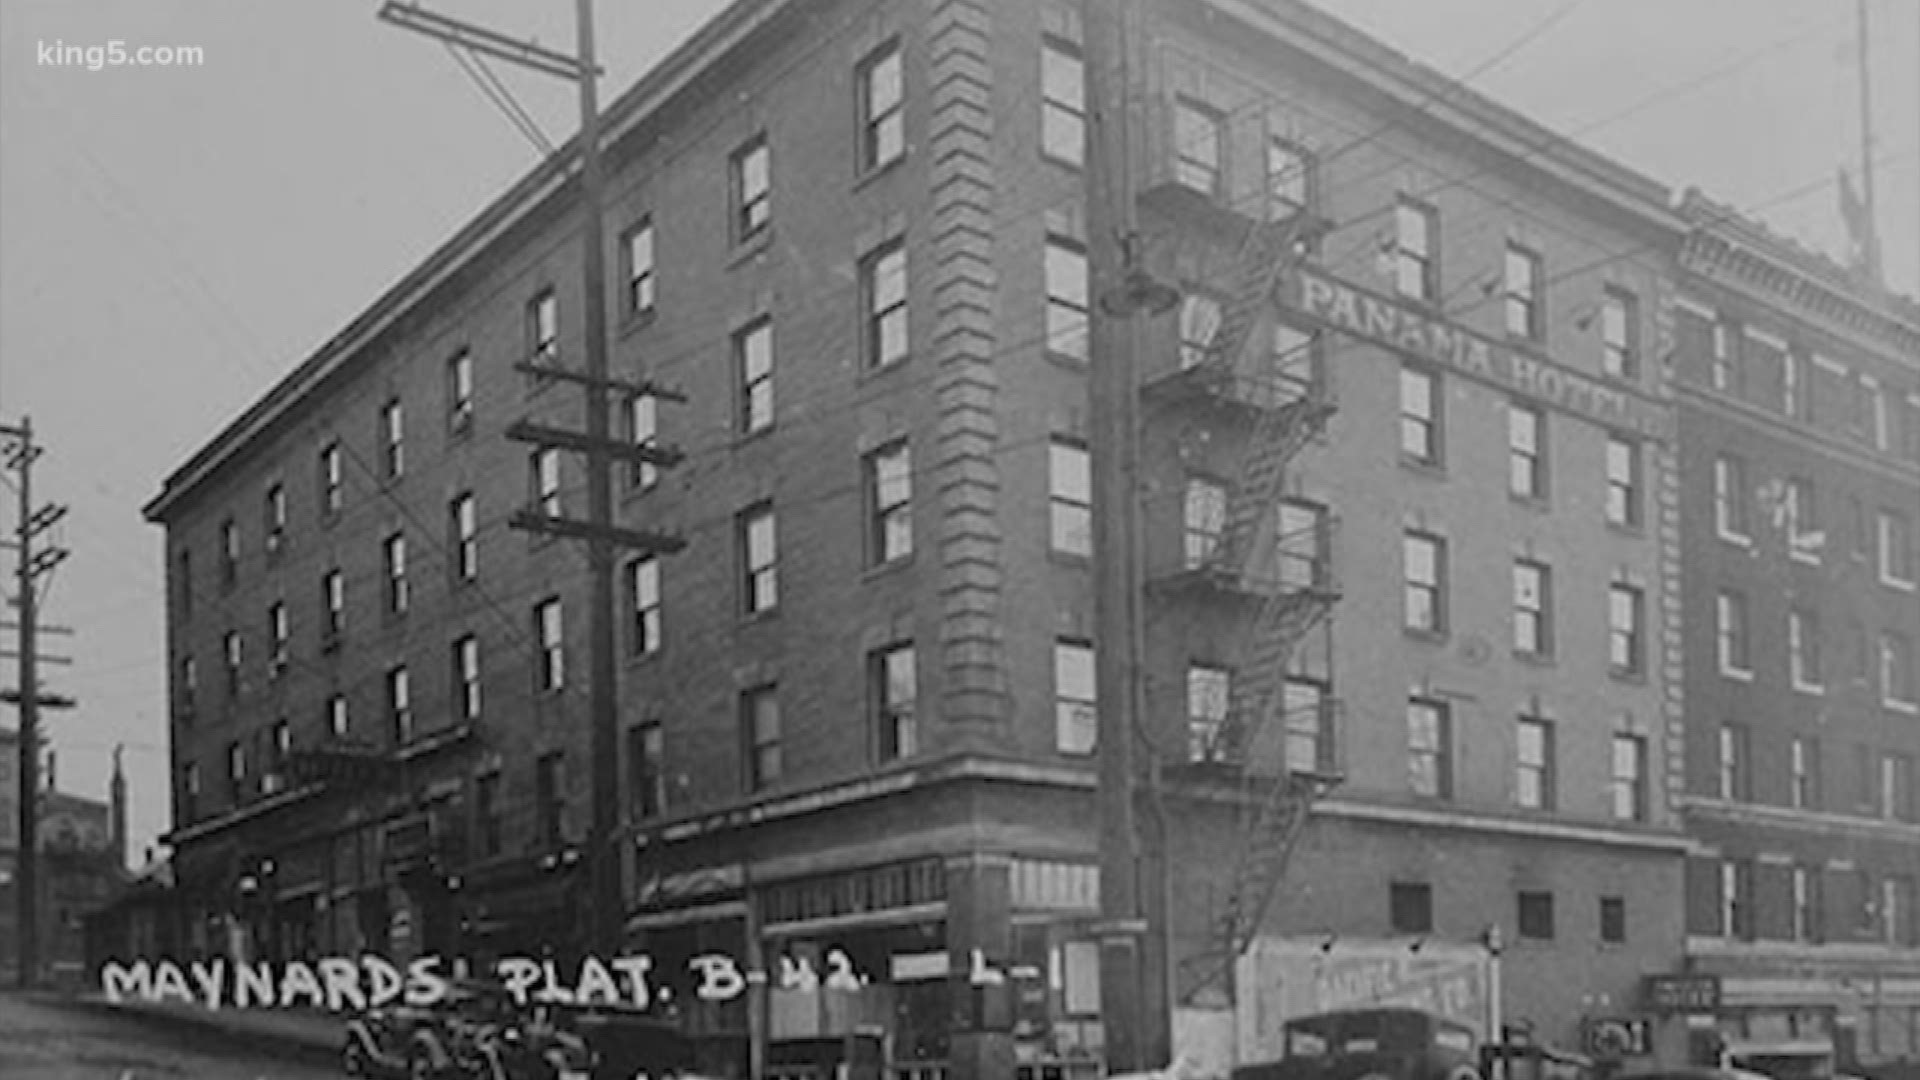 The Panama Hotel in Seattle is rich with Japanese American history before World War II.